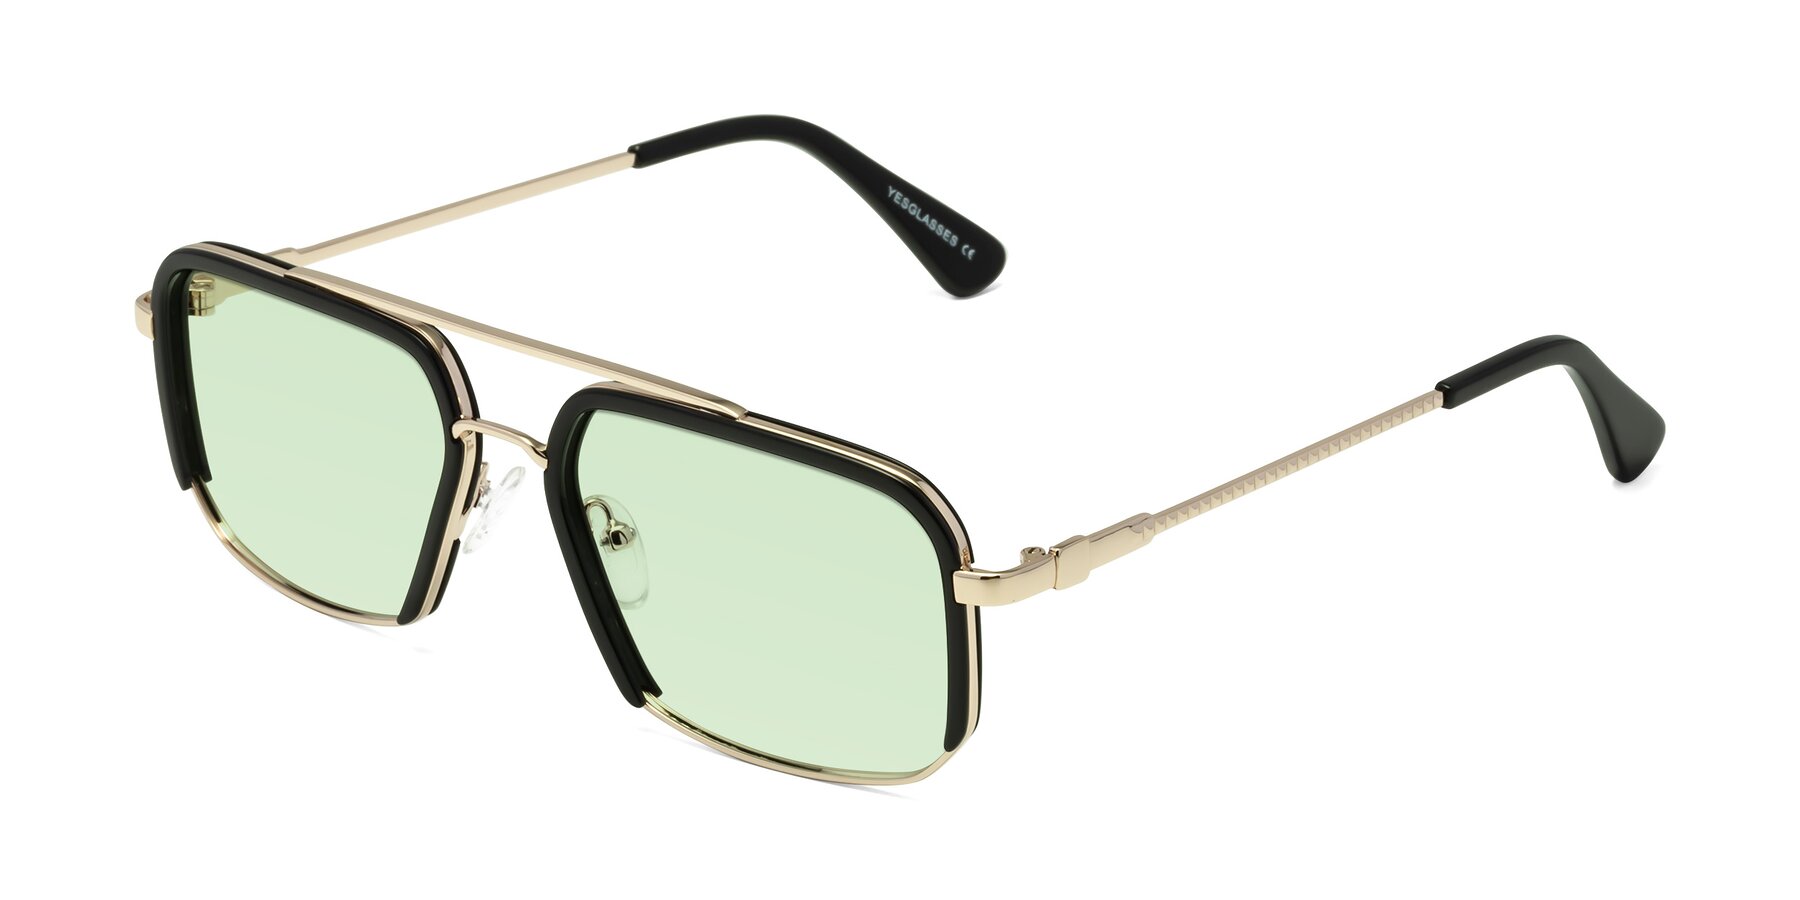 Angle of Dechter in Black-Gold with Light Green Tinted Lenses